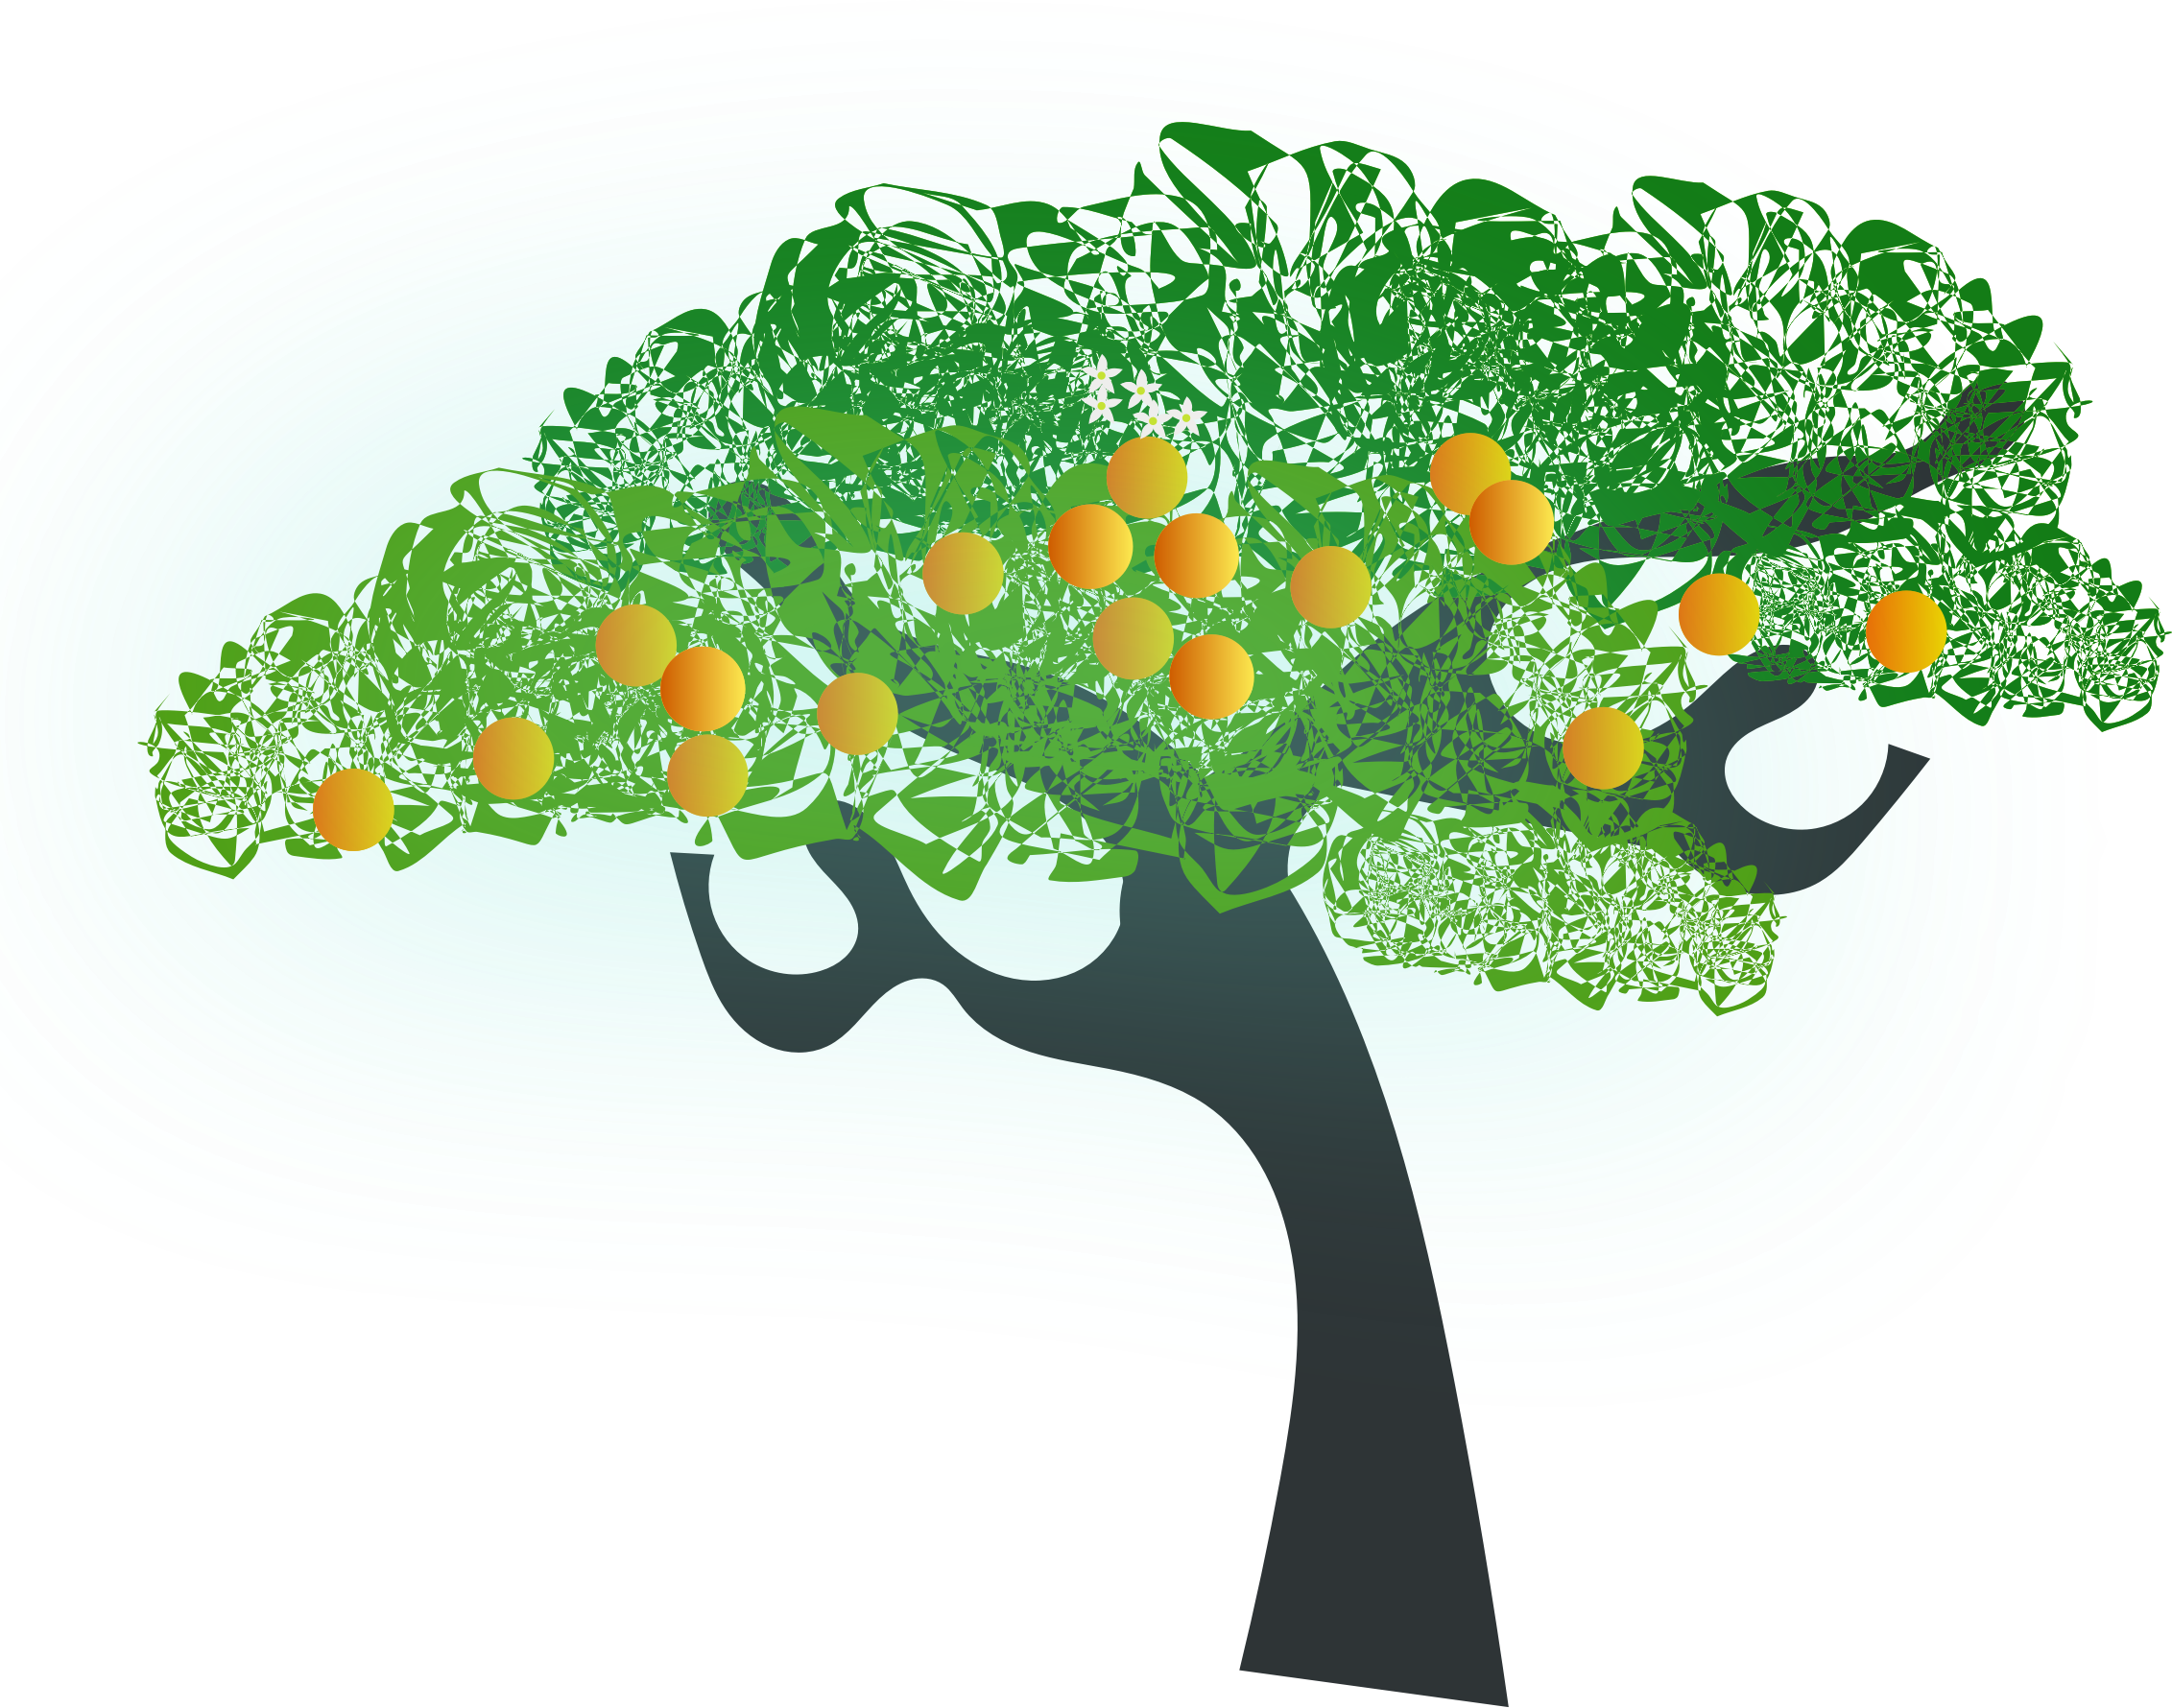 Download 28 Collection Of Orange Tree Clipart Png Orange Tree Clip Art Png Image With No Background Pngkey Com